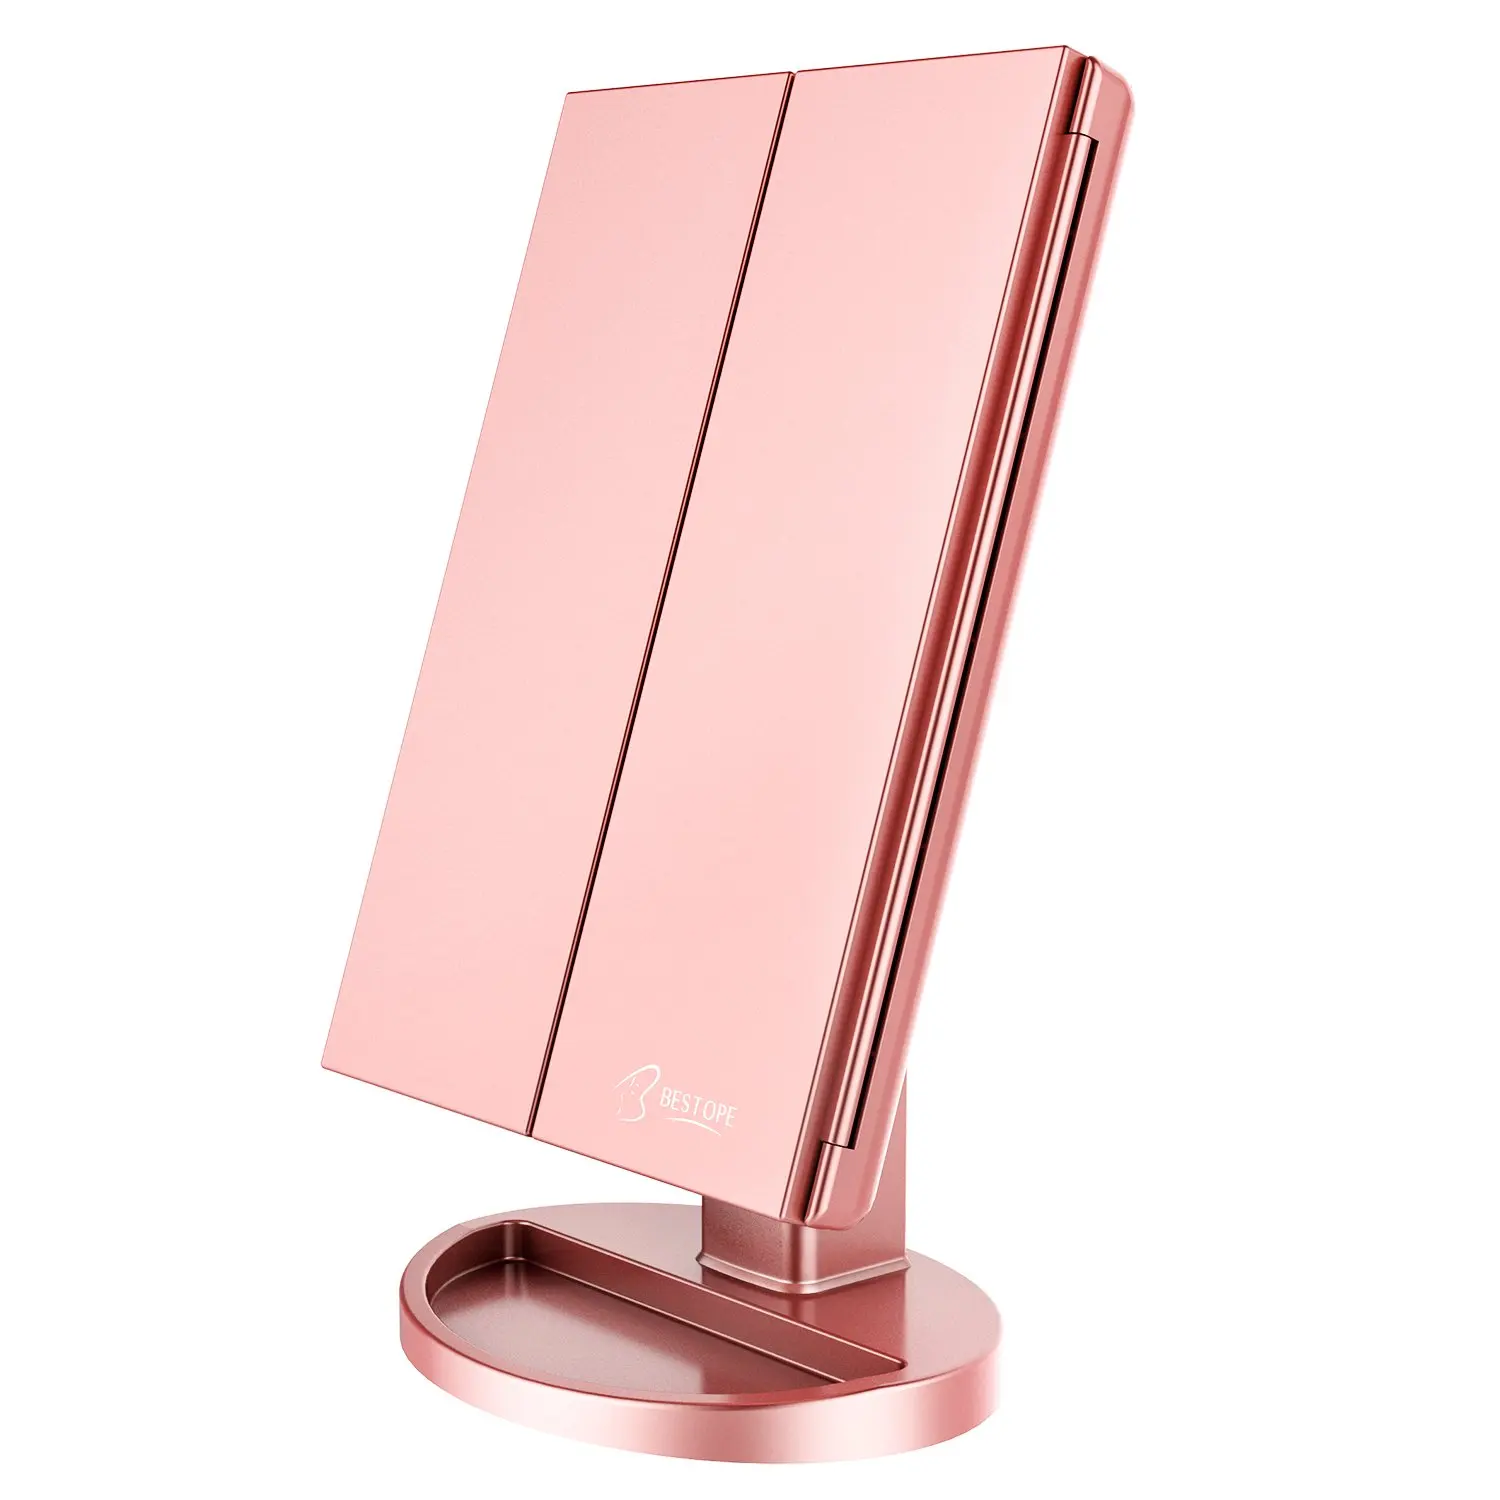 

Bestope Amazon Choice Three Ways Foldable 1X 2X 3X Magnifier Led Light Vanity Table Makeup Mirror For Beauty Women, Rose gold